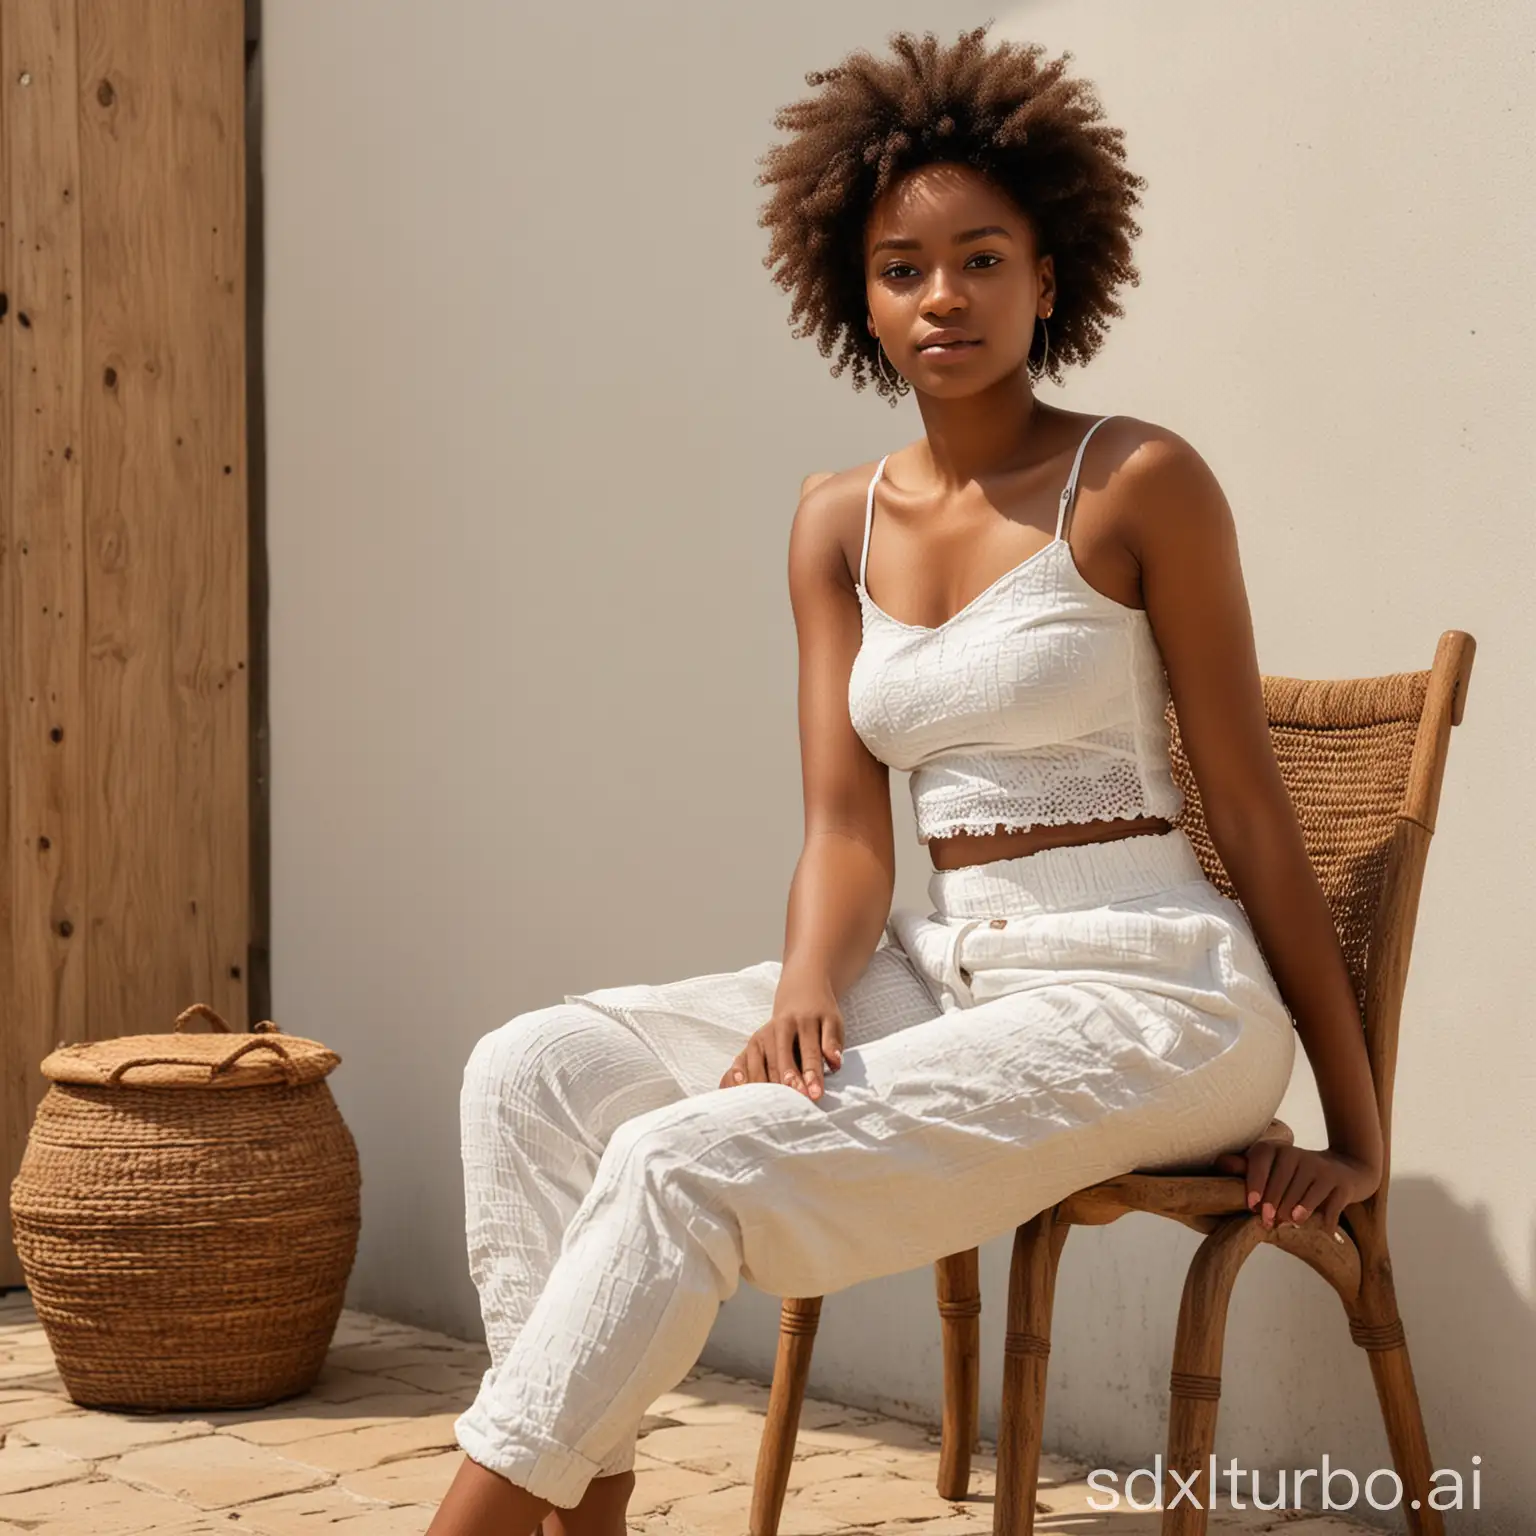 a realistic 22 years African woman with breaded hair with a slim belly and large waist wearing african textured slim trousers and a white top. sitting on a wooden chair on an sunny outside